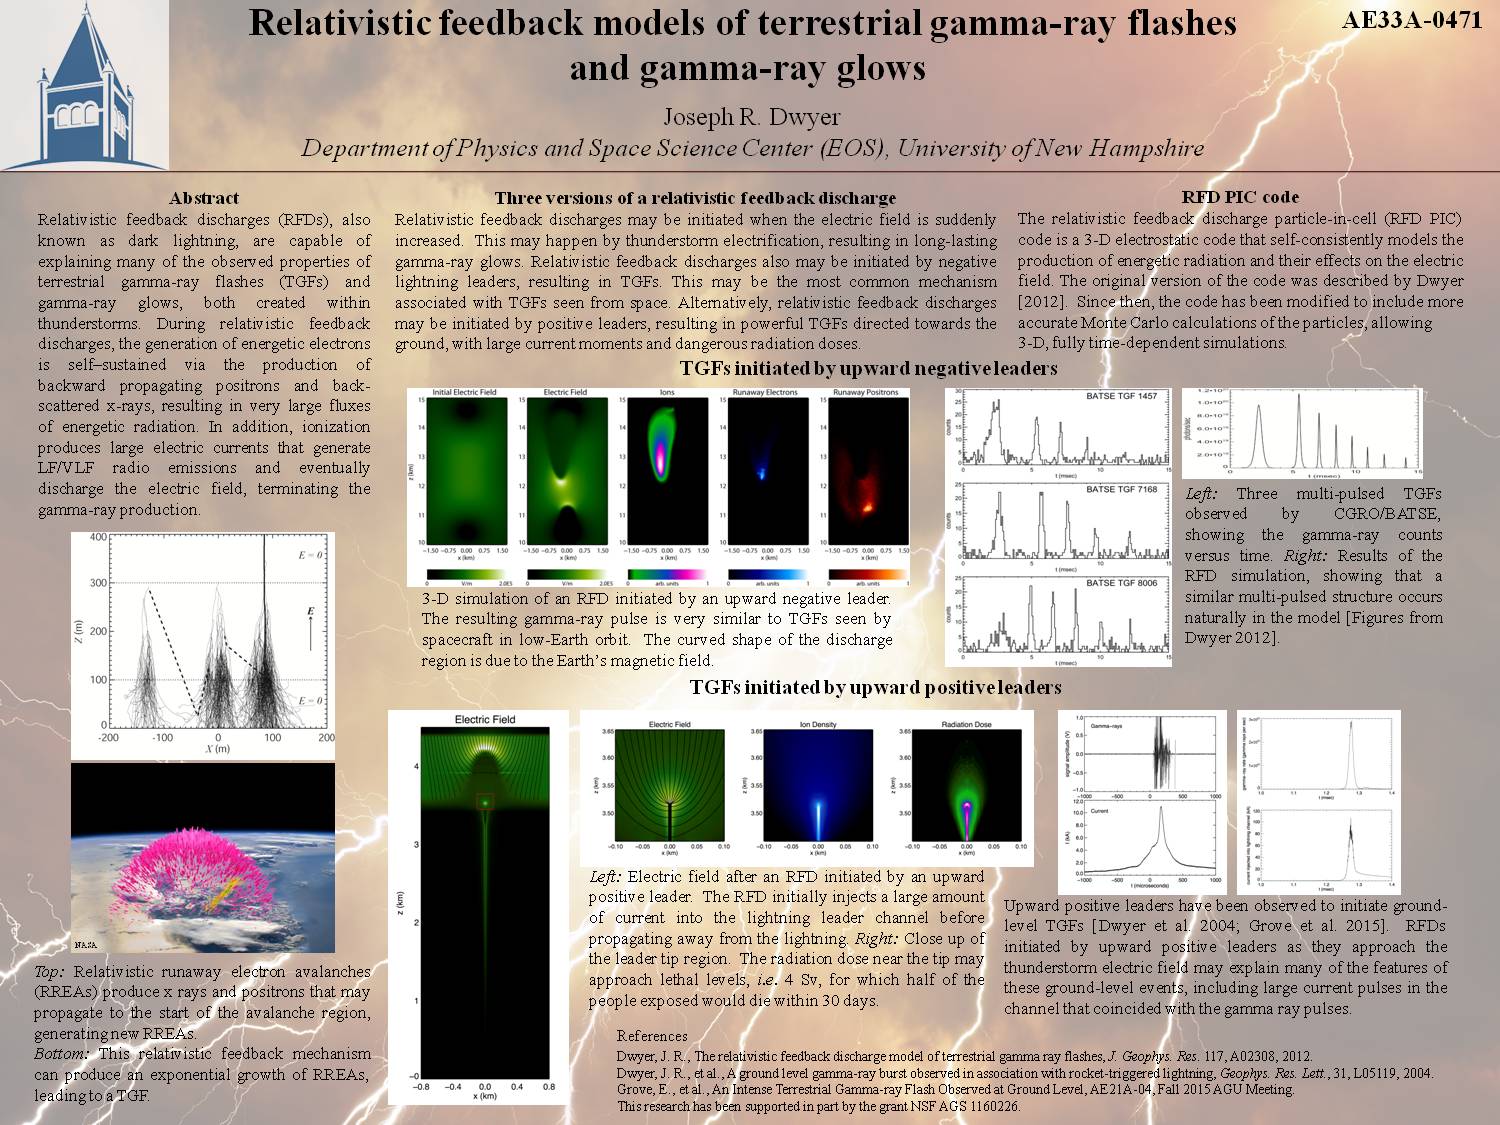 Relativistic Feedback Models Of Terrestrial Gamma-Ray Flashes And Gamma-Ray Glows by jrd1002